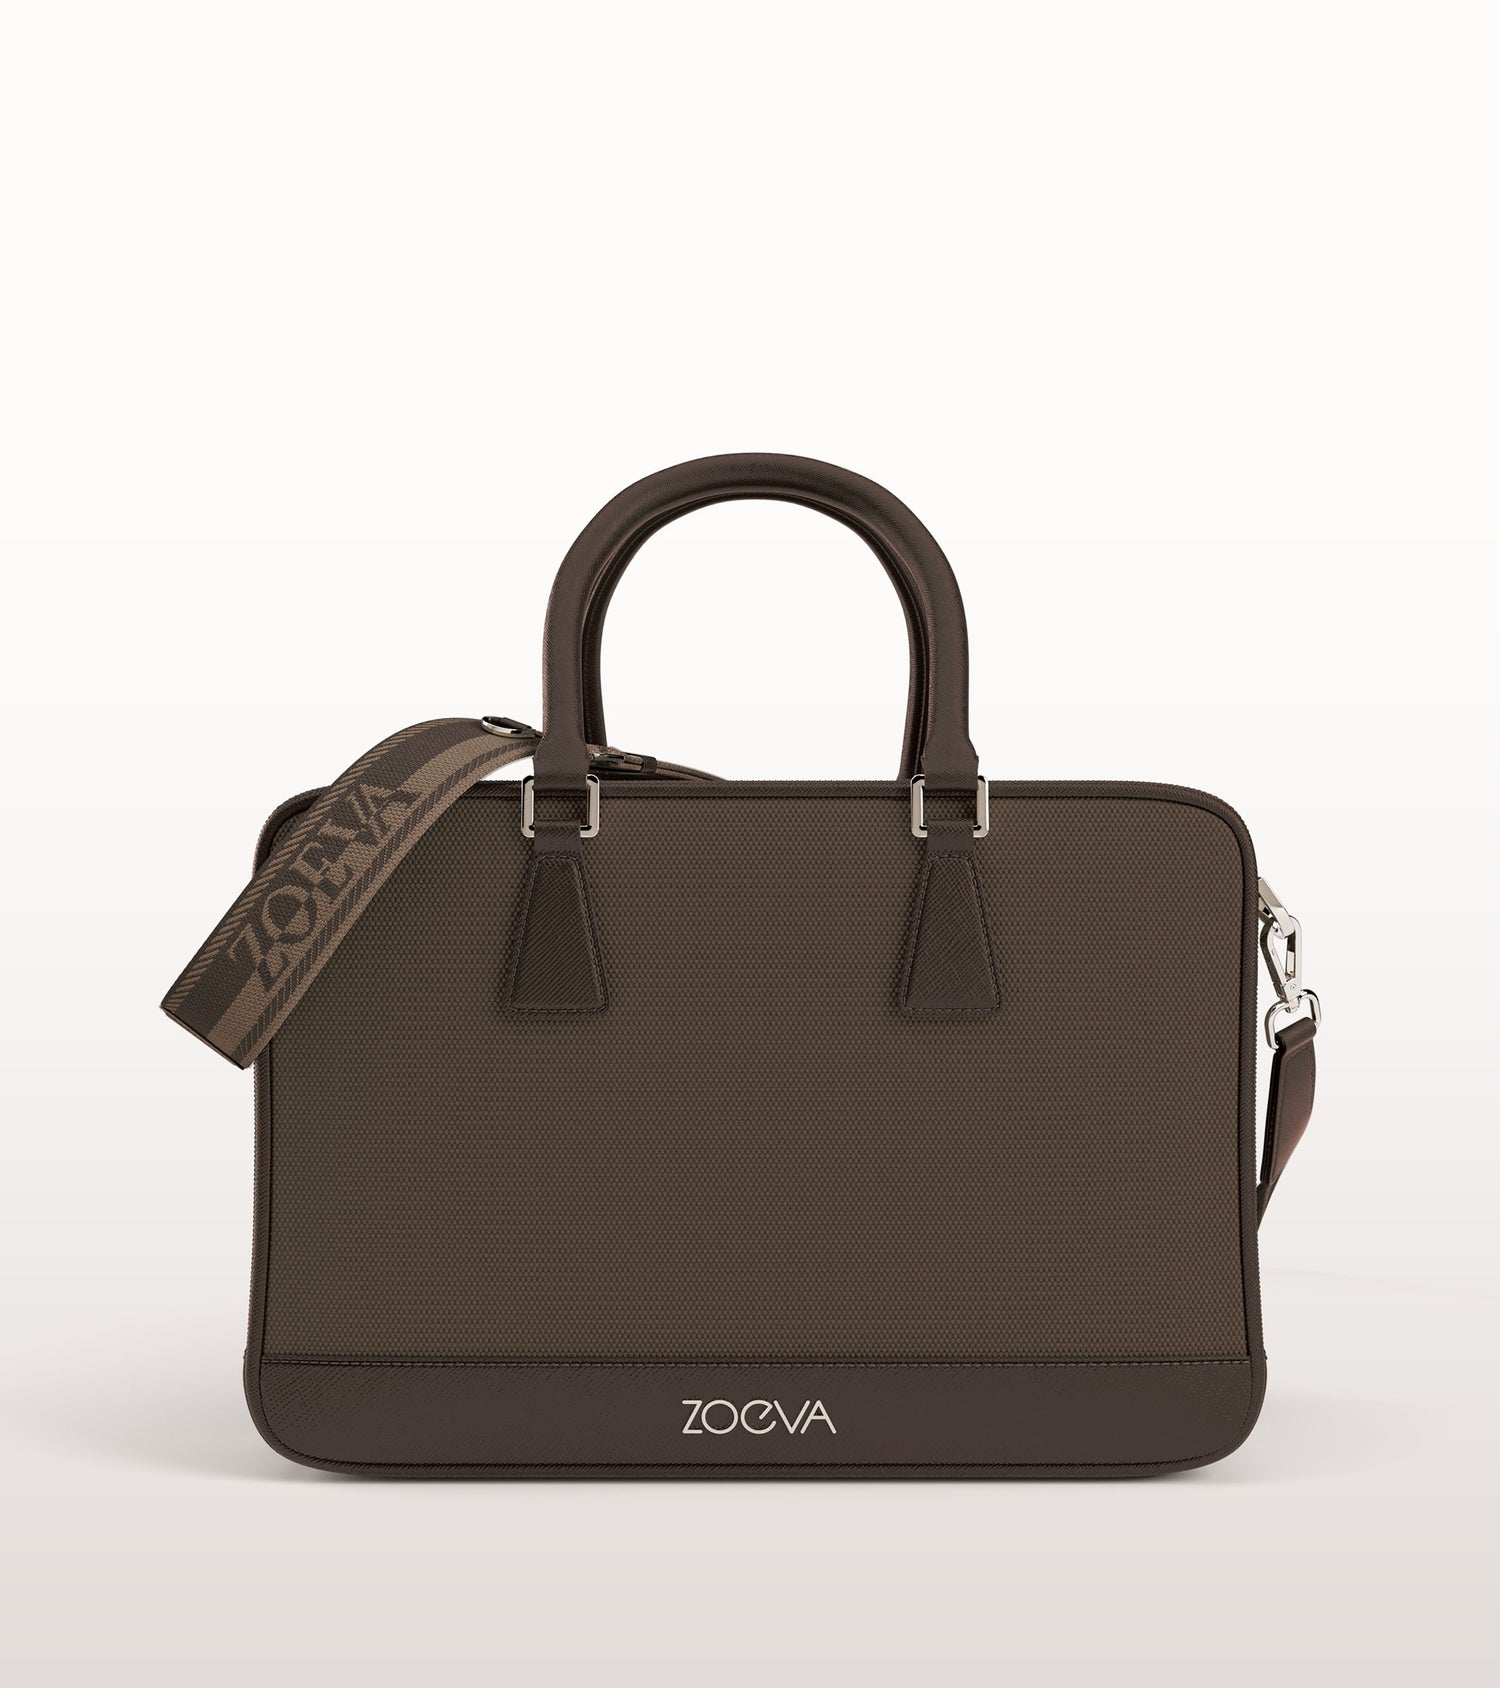 ZOEVA - The Zoe Bag & The Complete Pinselset (Chocolate) - BRUSH SET